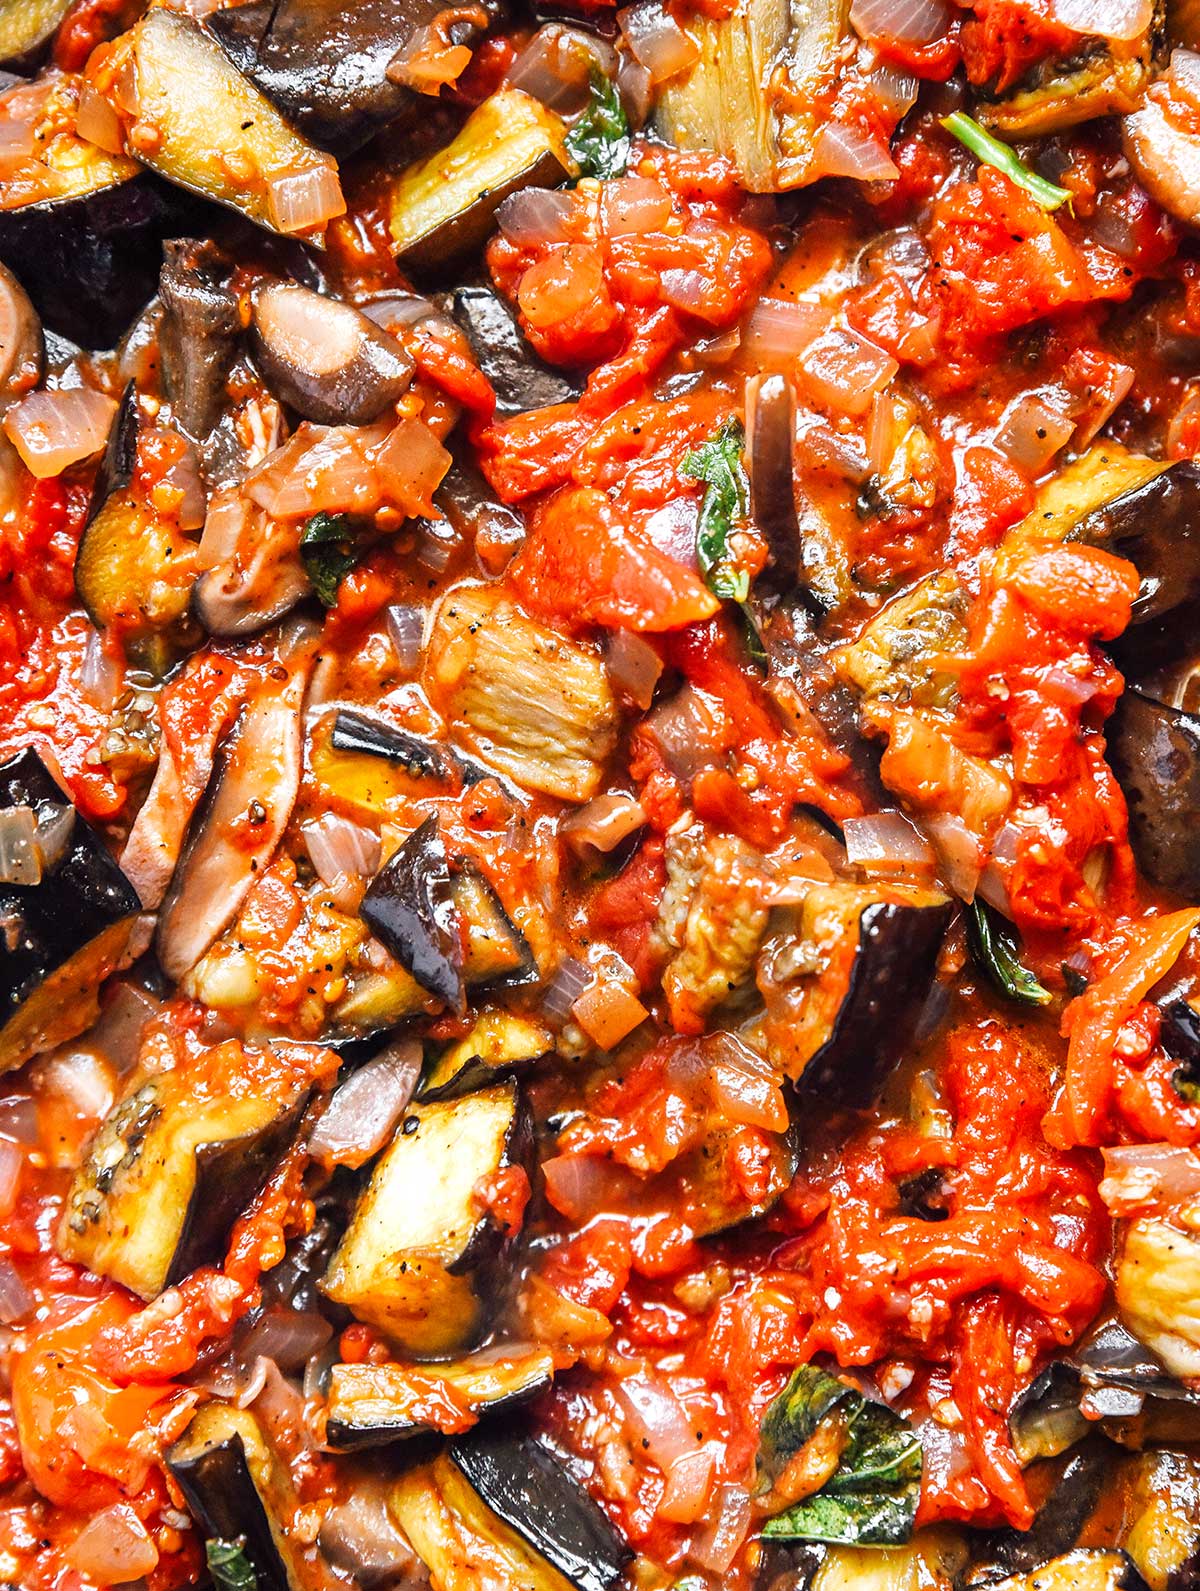 A close up, detailed view of vegetable bolognese sauce ingredients